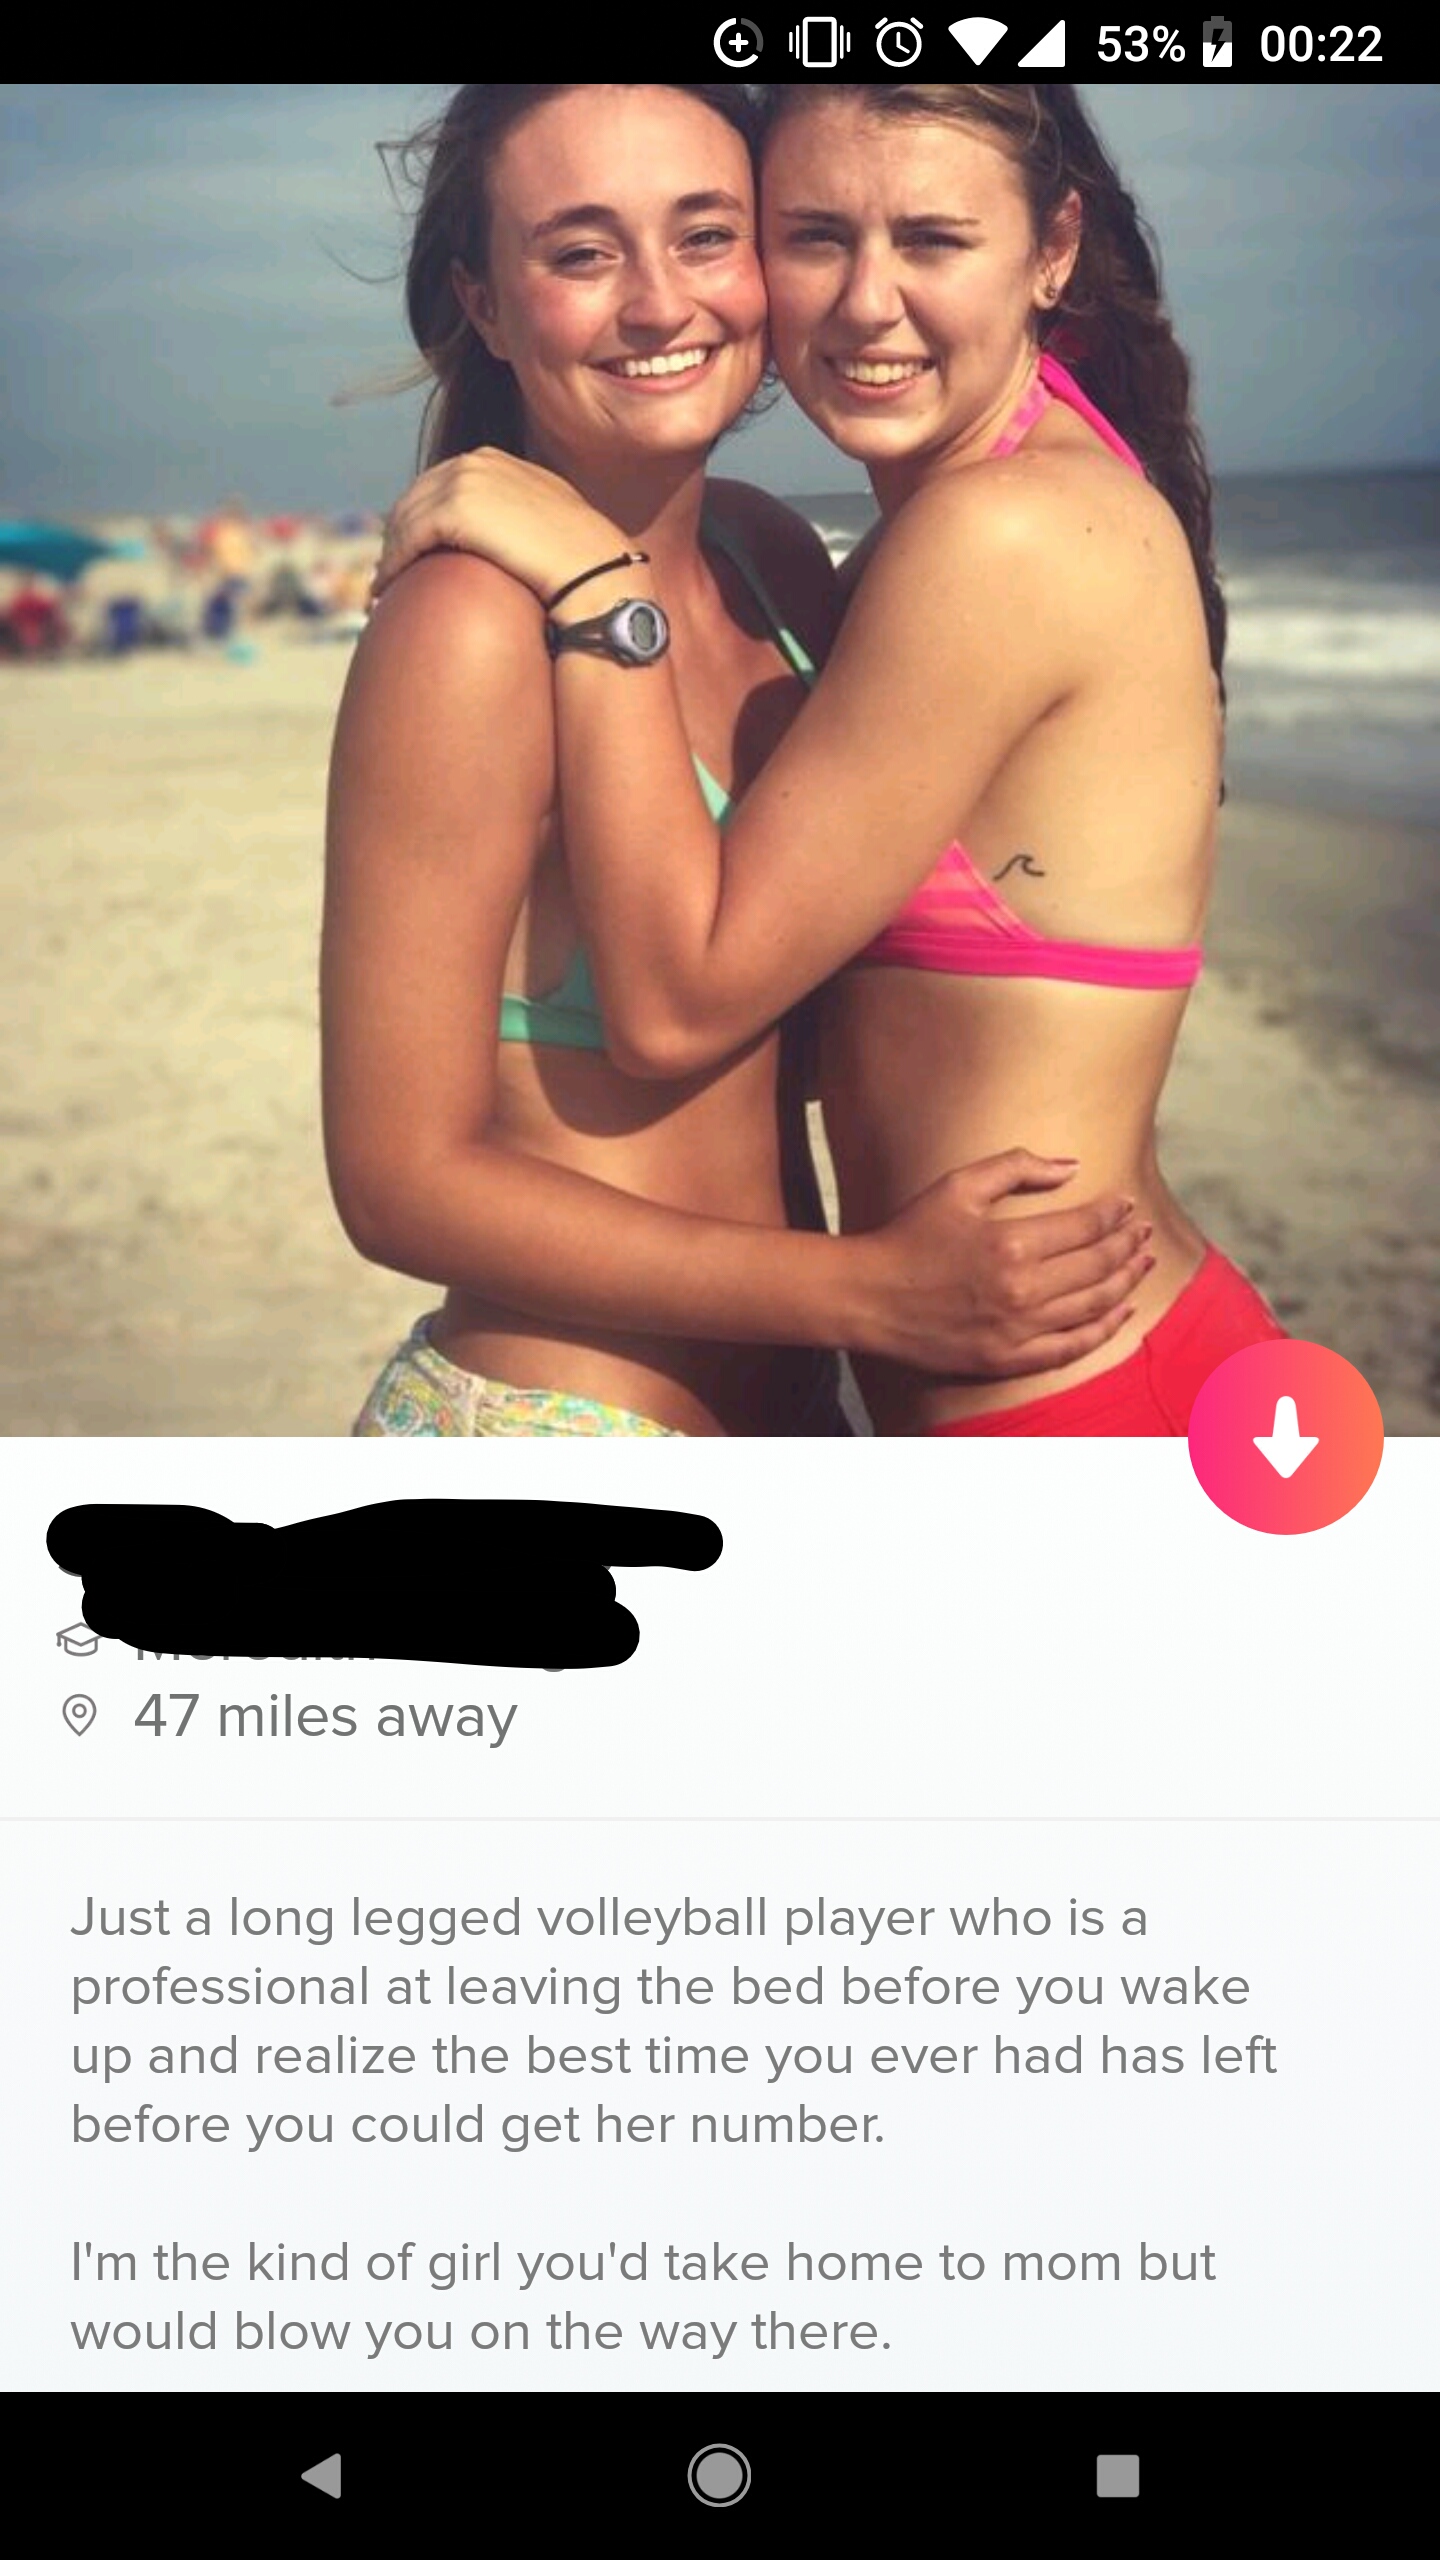 photo caption - 600 53% 47 miles away Just a long legged volleyball player who is a professional at leaving the bed before you wake up and realize the best time you ever had has left before you could get her number I'm the kind of girl you'd take home to 